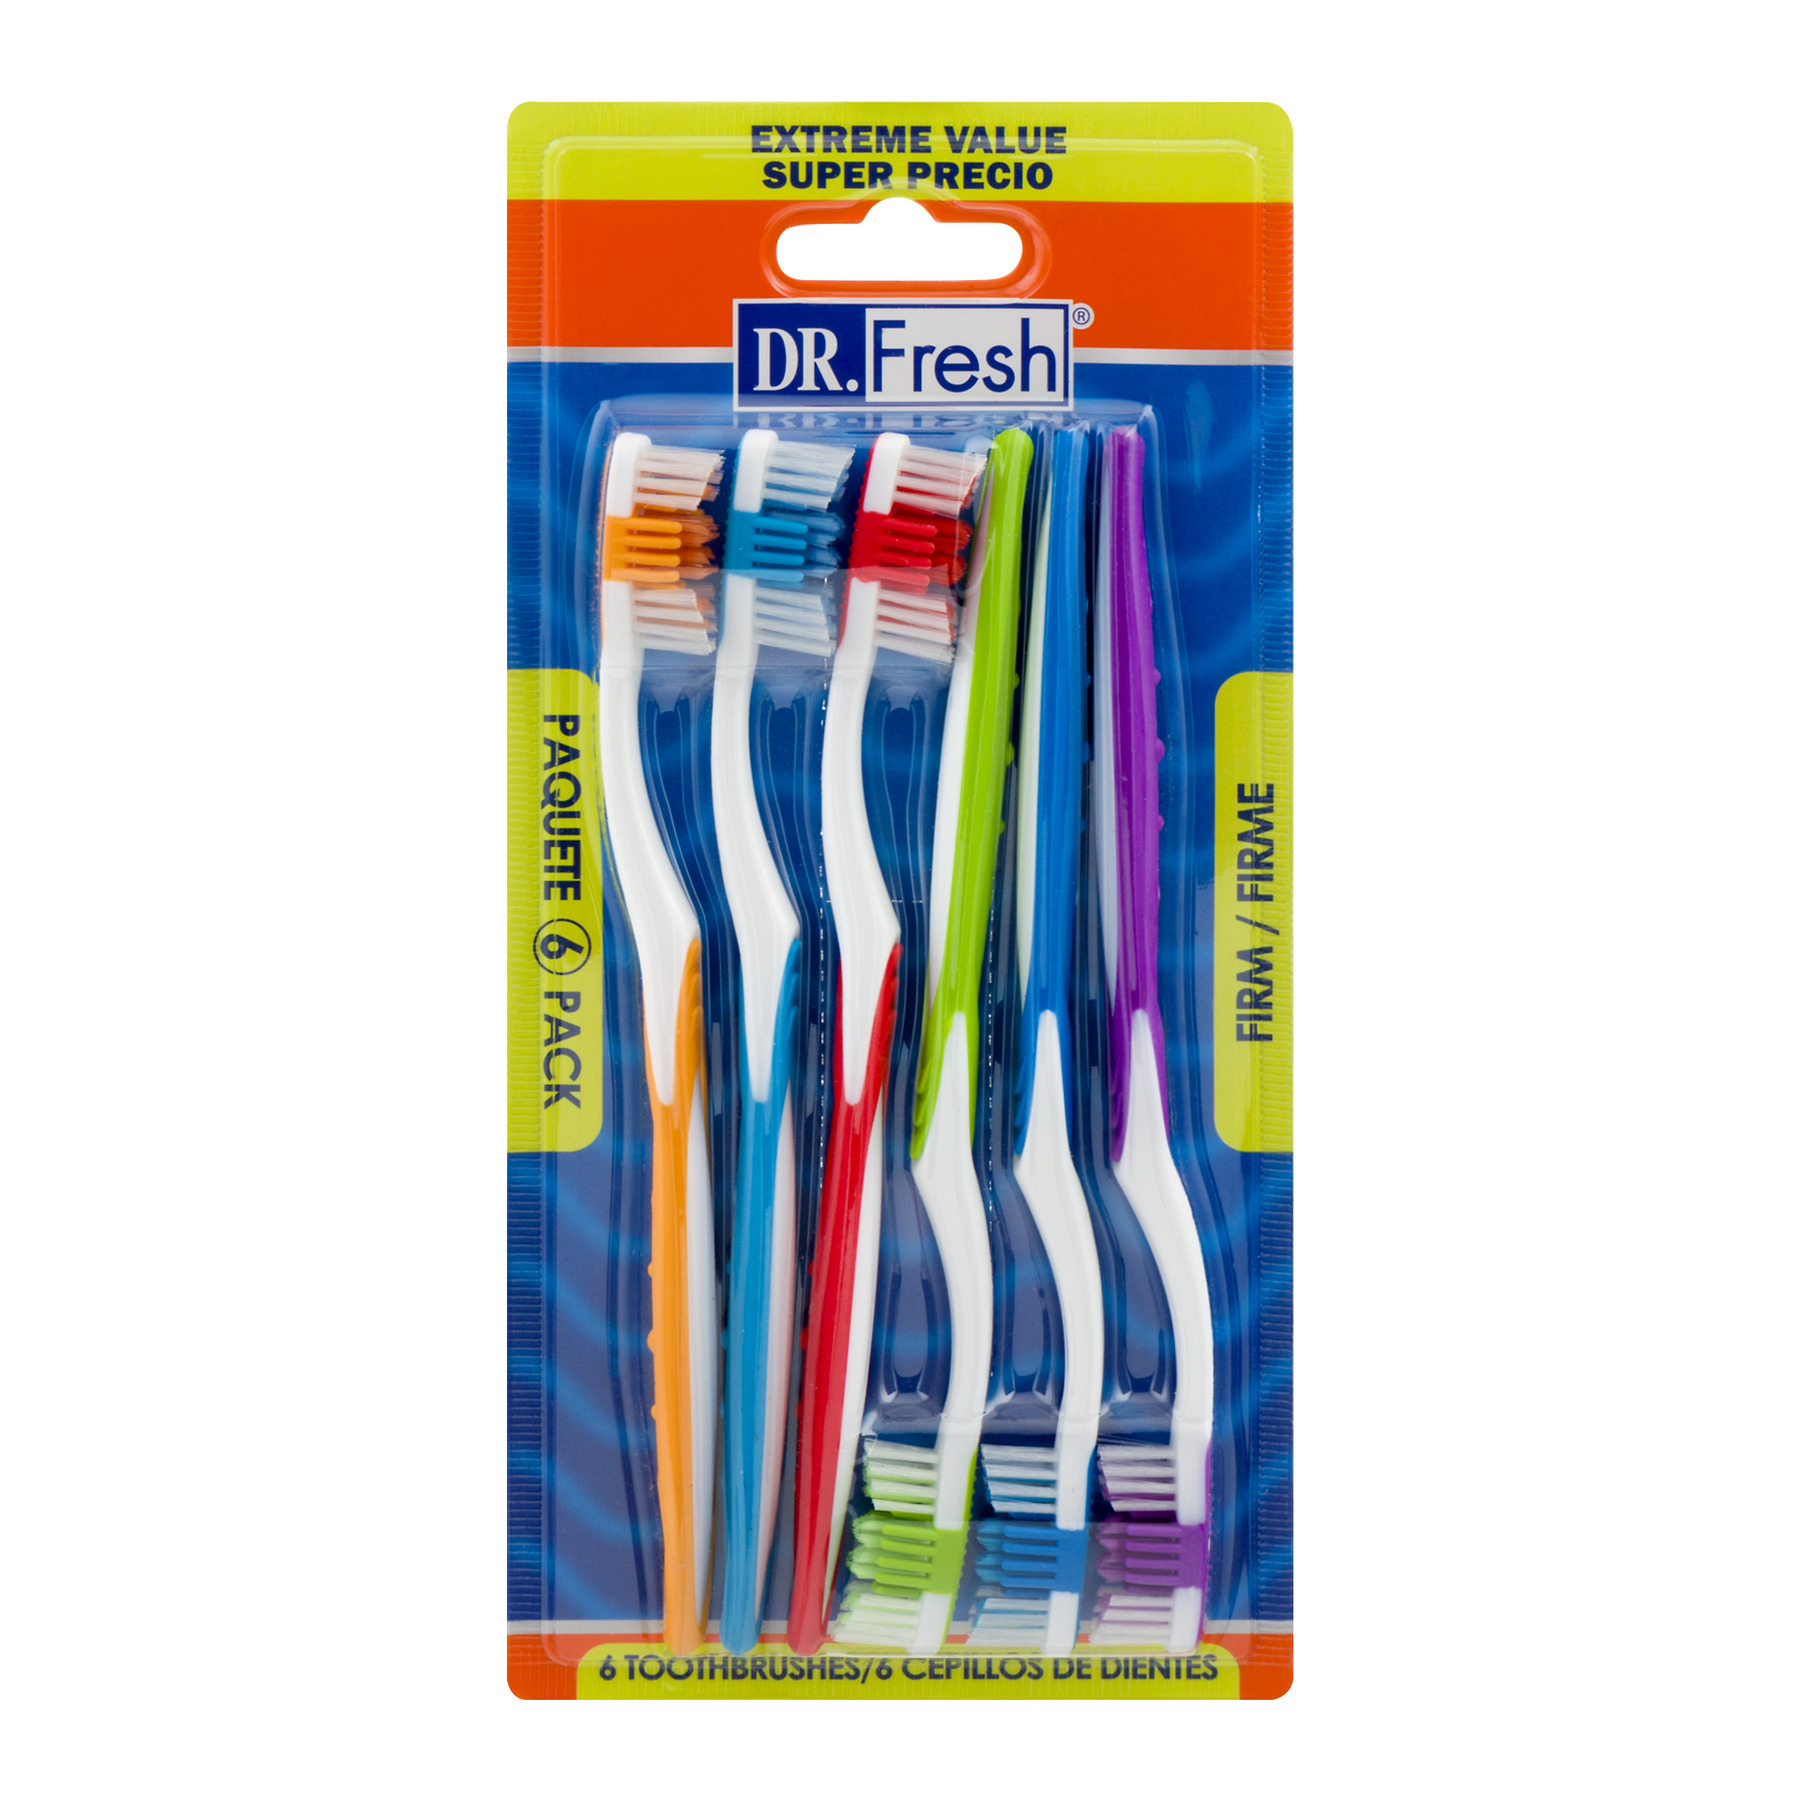 Dr. Fresh Dailies Toothbrushes, Firm, 6 Ct - image 1 of 5